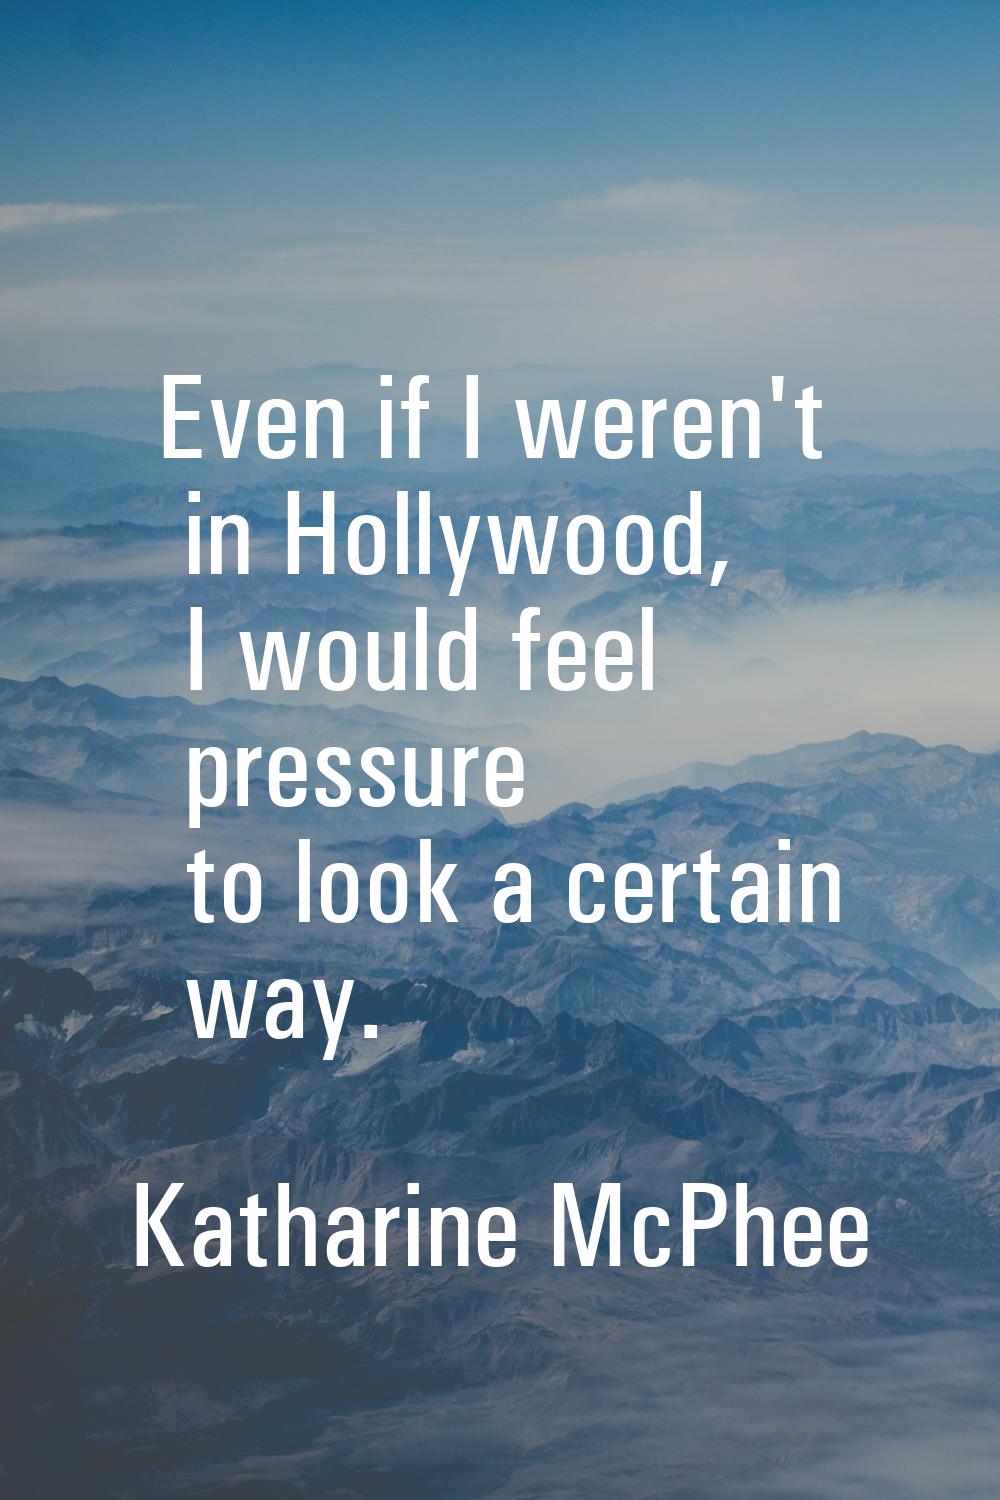 Even if I weren't in Hollywood, I would feel pressure to look a certain way.